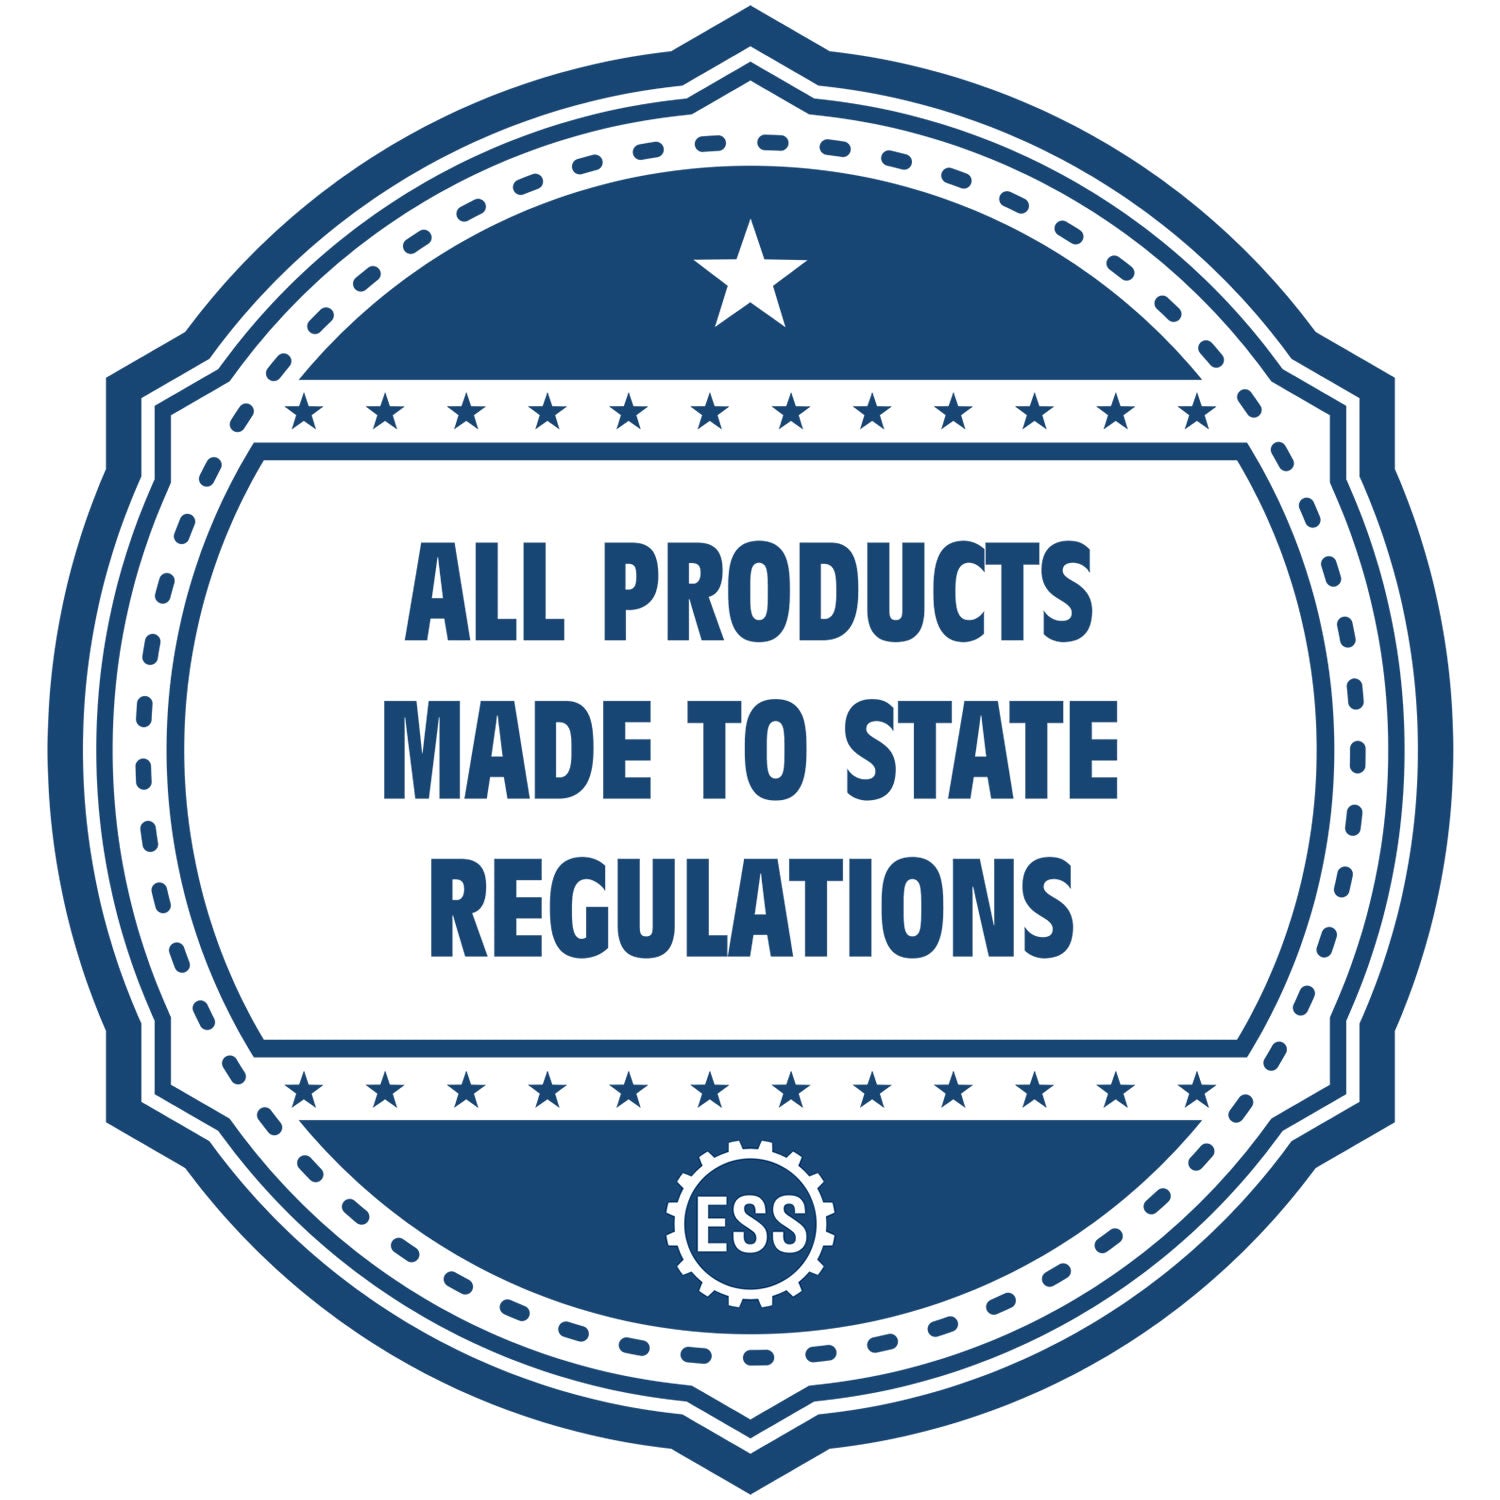 An icon or badge element for the State of Colorado Extended Long Reach Engineer Seal showing that this product is made in compliance with state regulations.